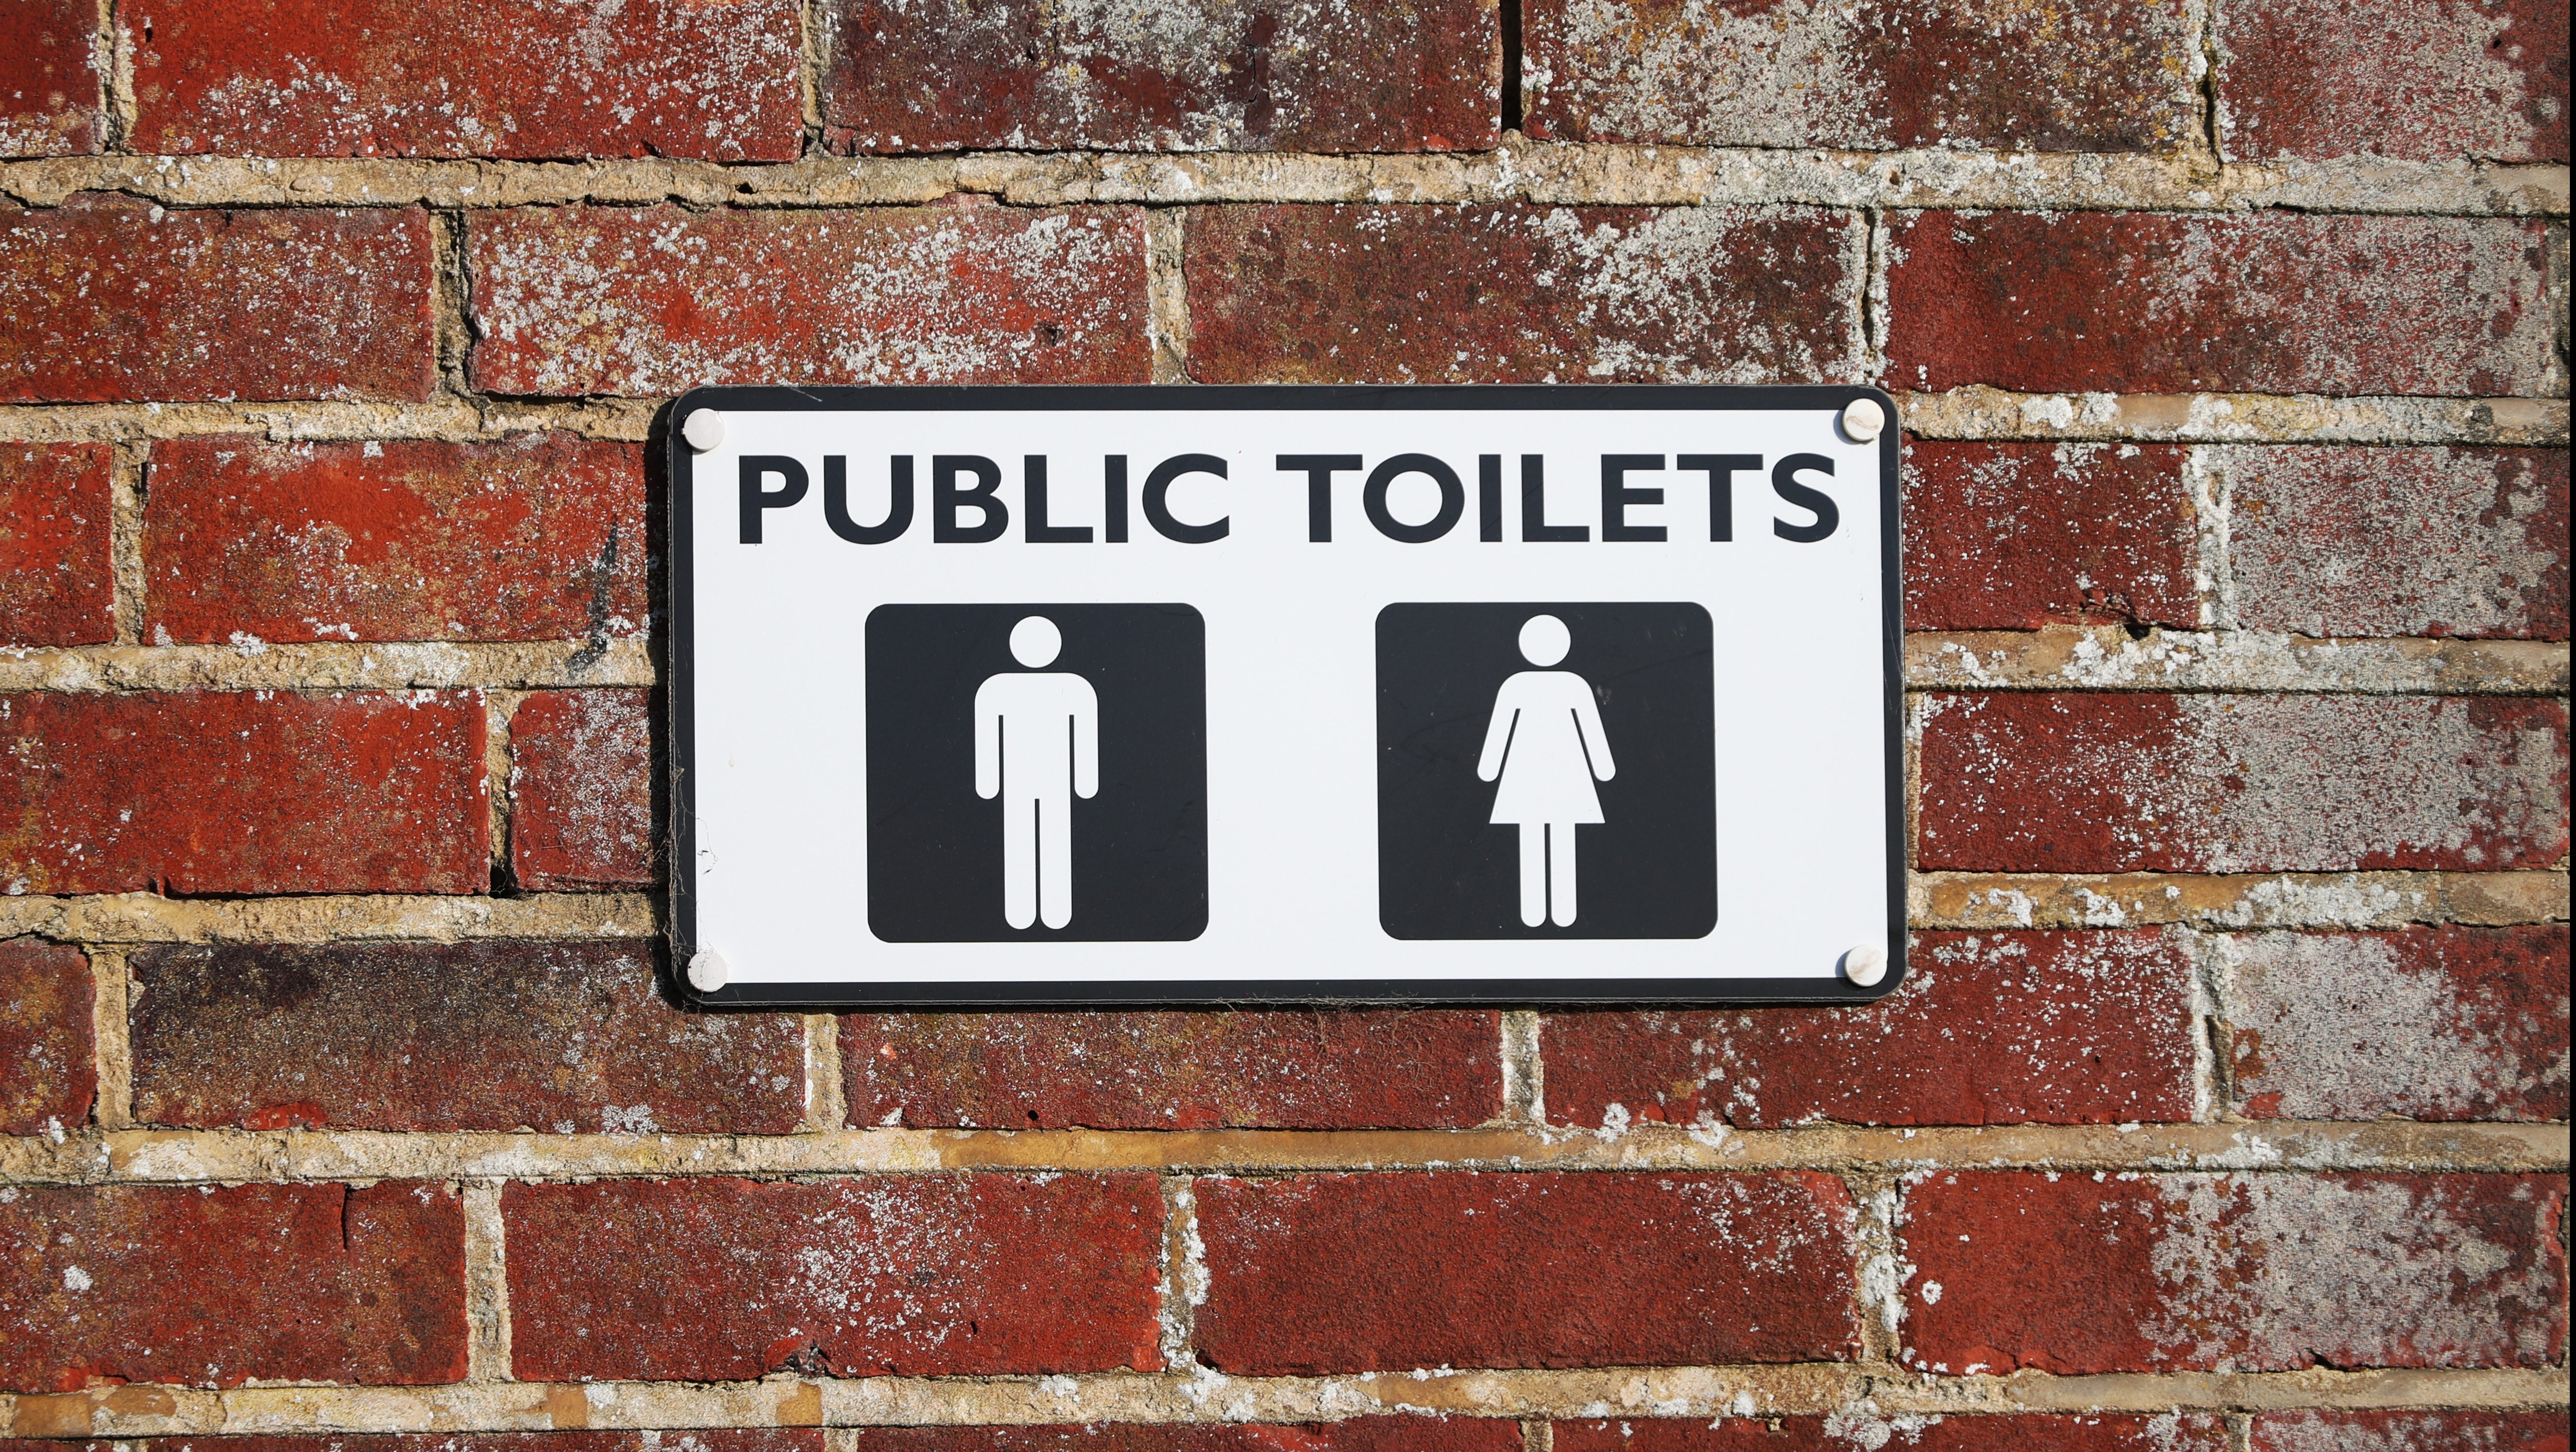 Toilet is closed. Public Toilets Sings. The Mad pooper. Public Toilets London. Public close